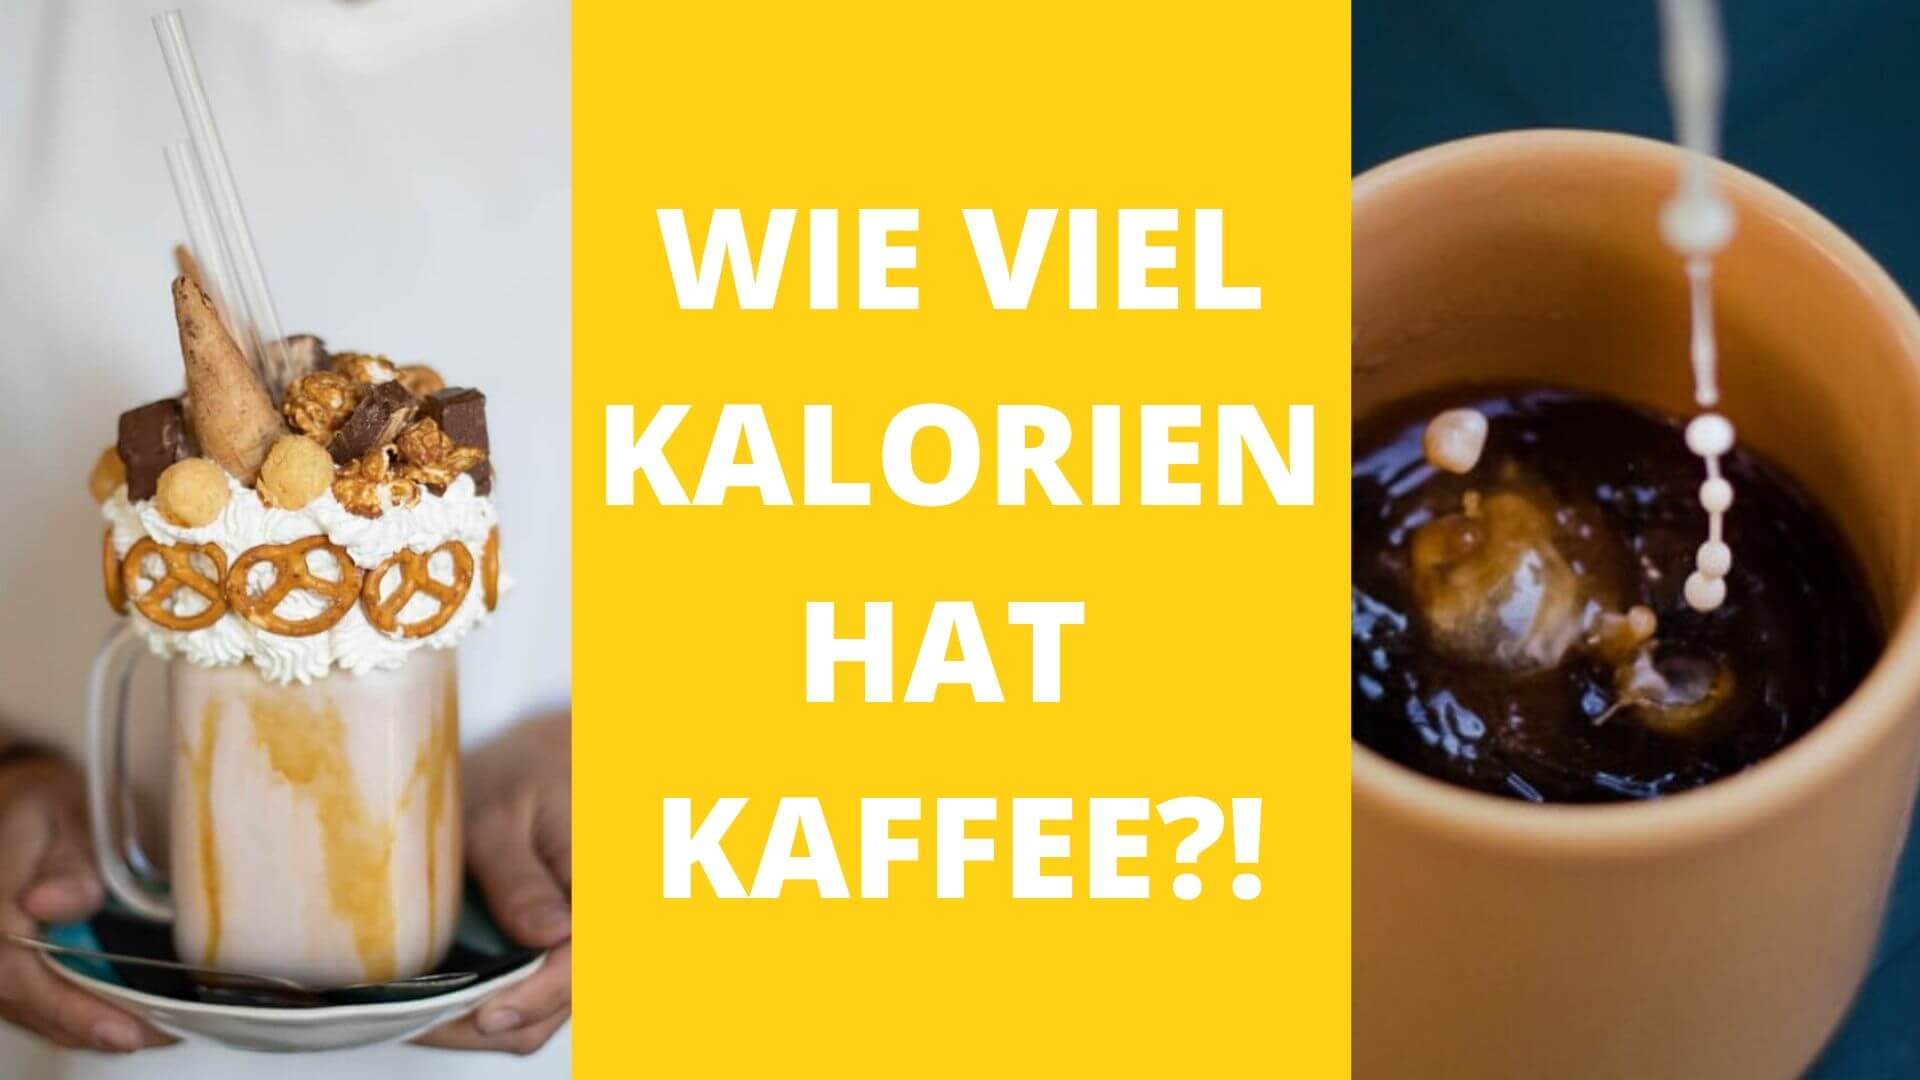 You are currently viewing KAFFEE KALORIEN